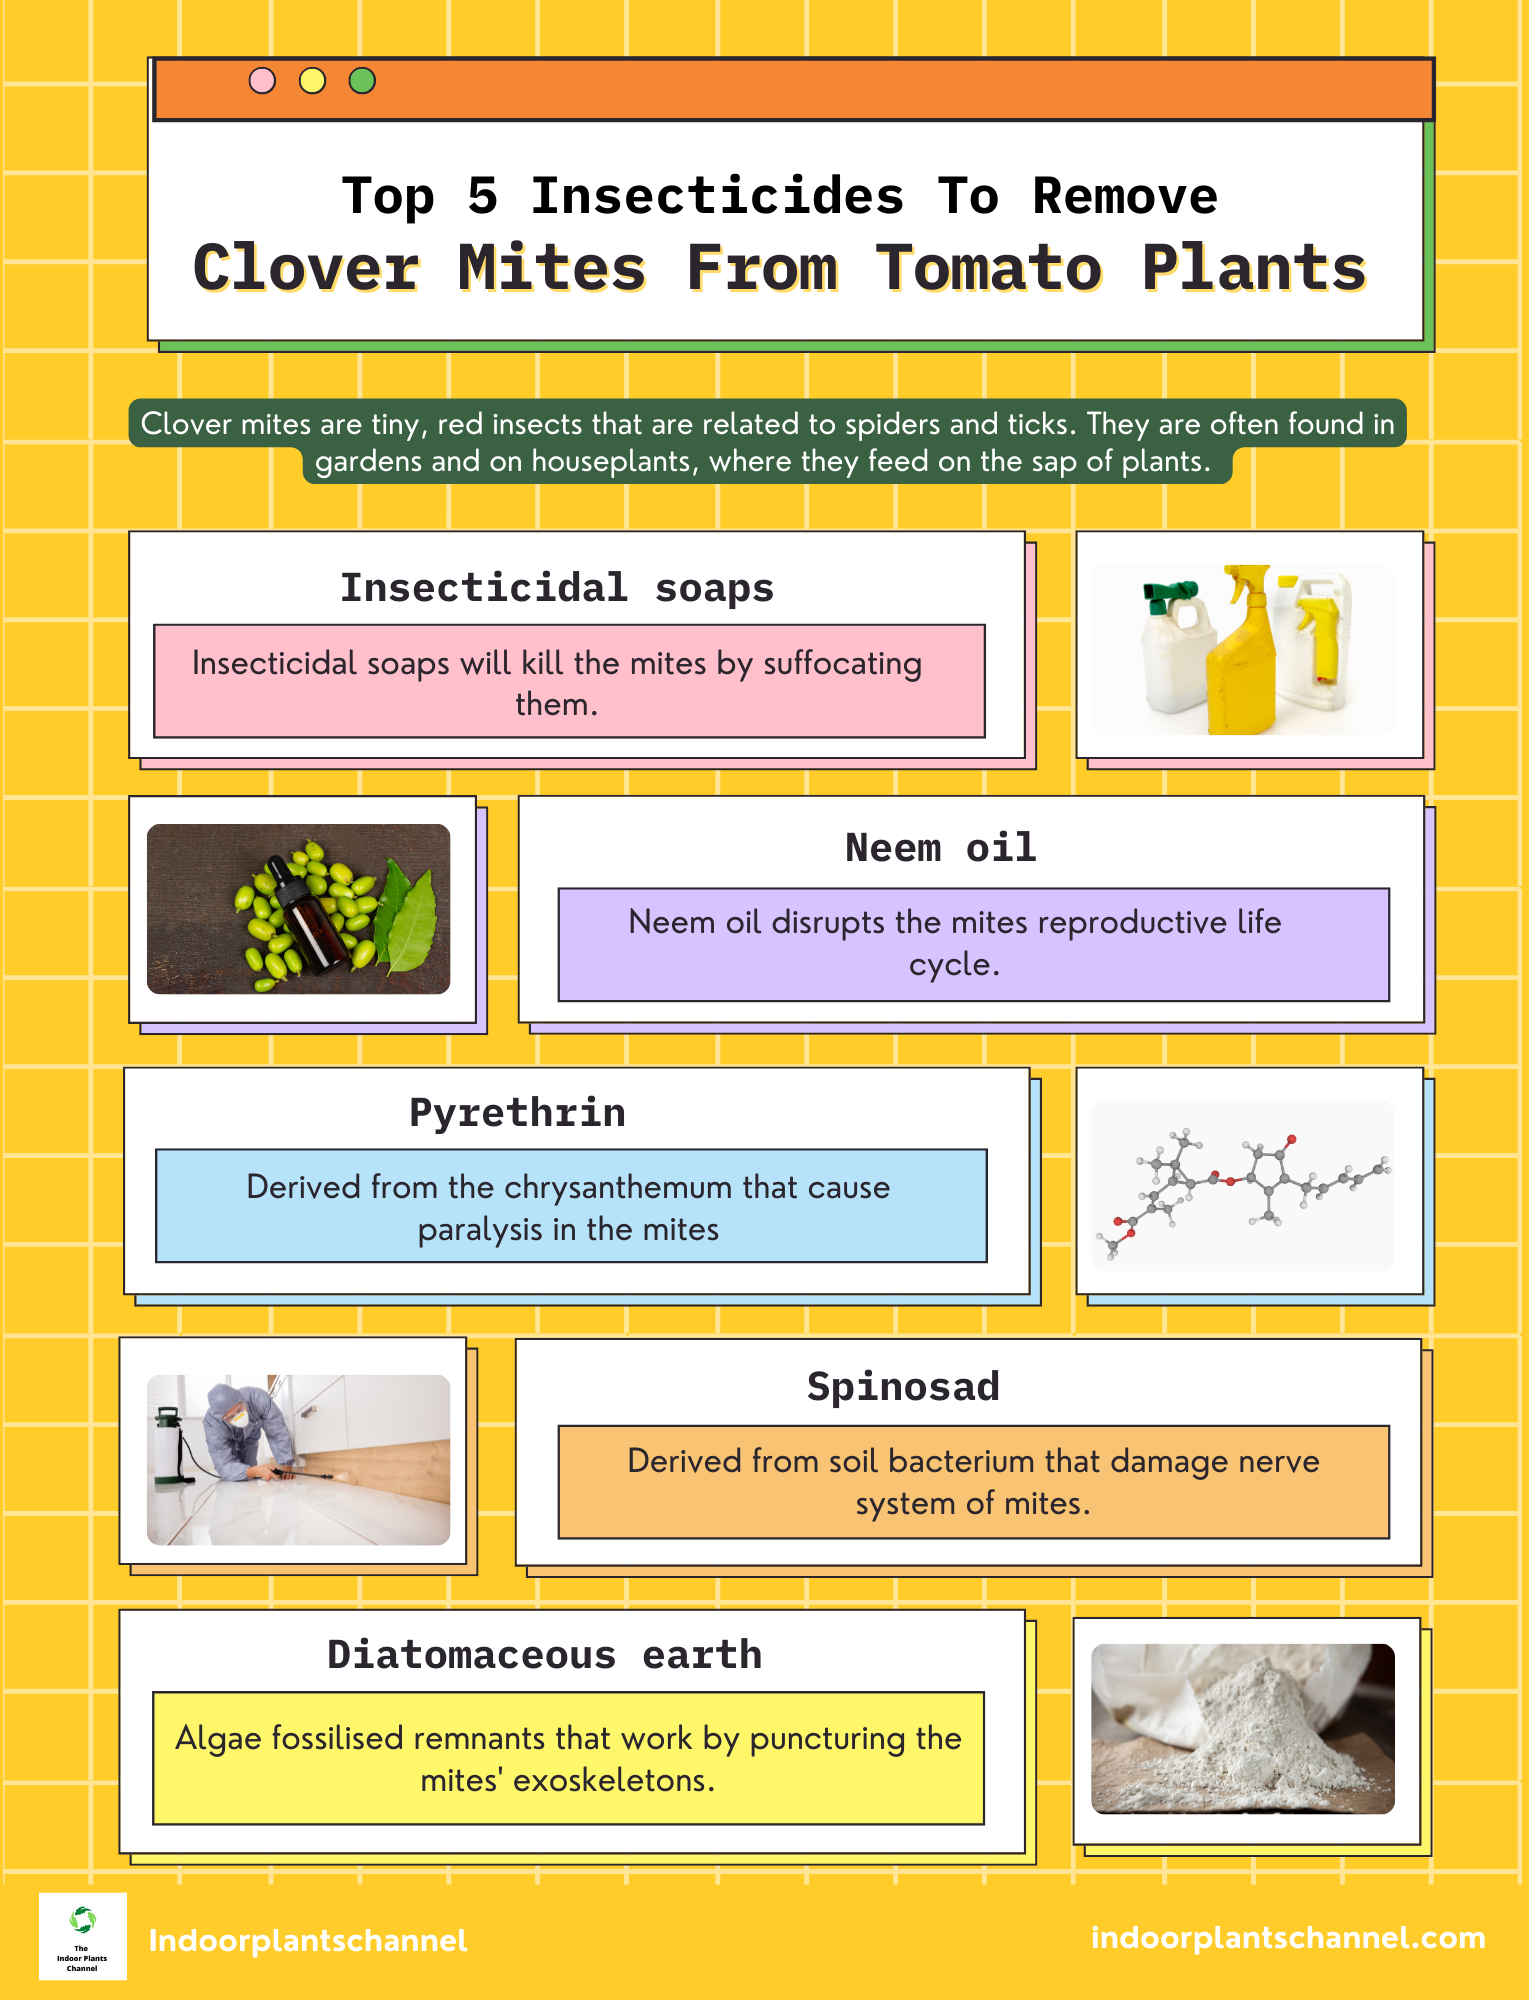 Top 5 Most Effective Insecticides For Clover Mites On Tomato Plants